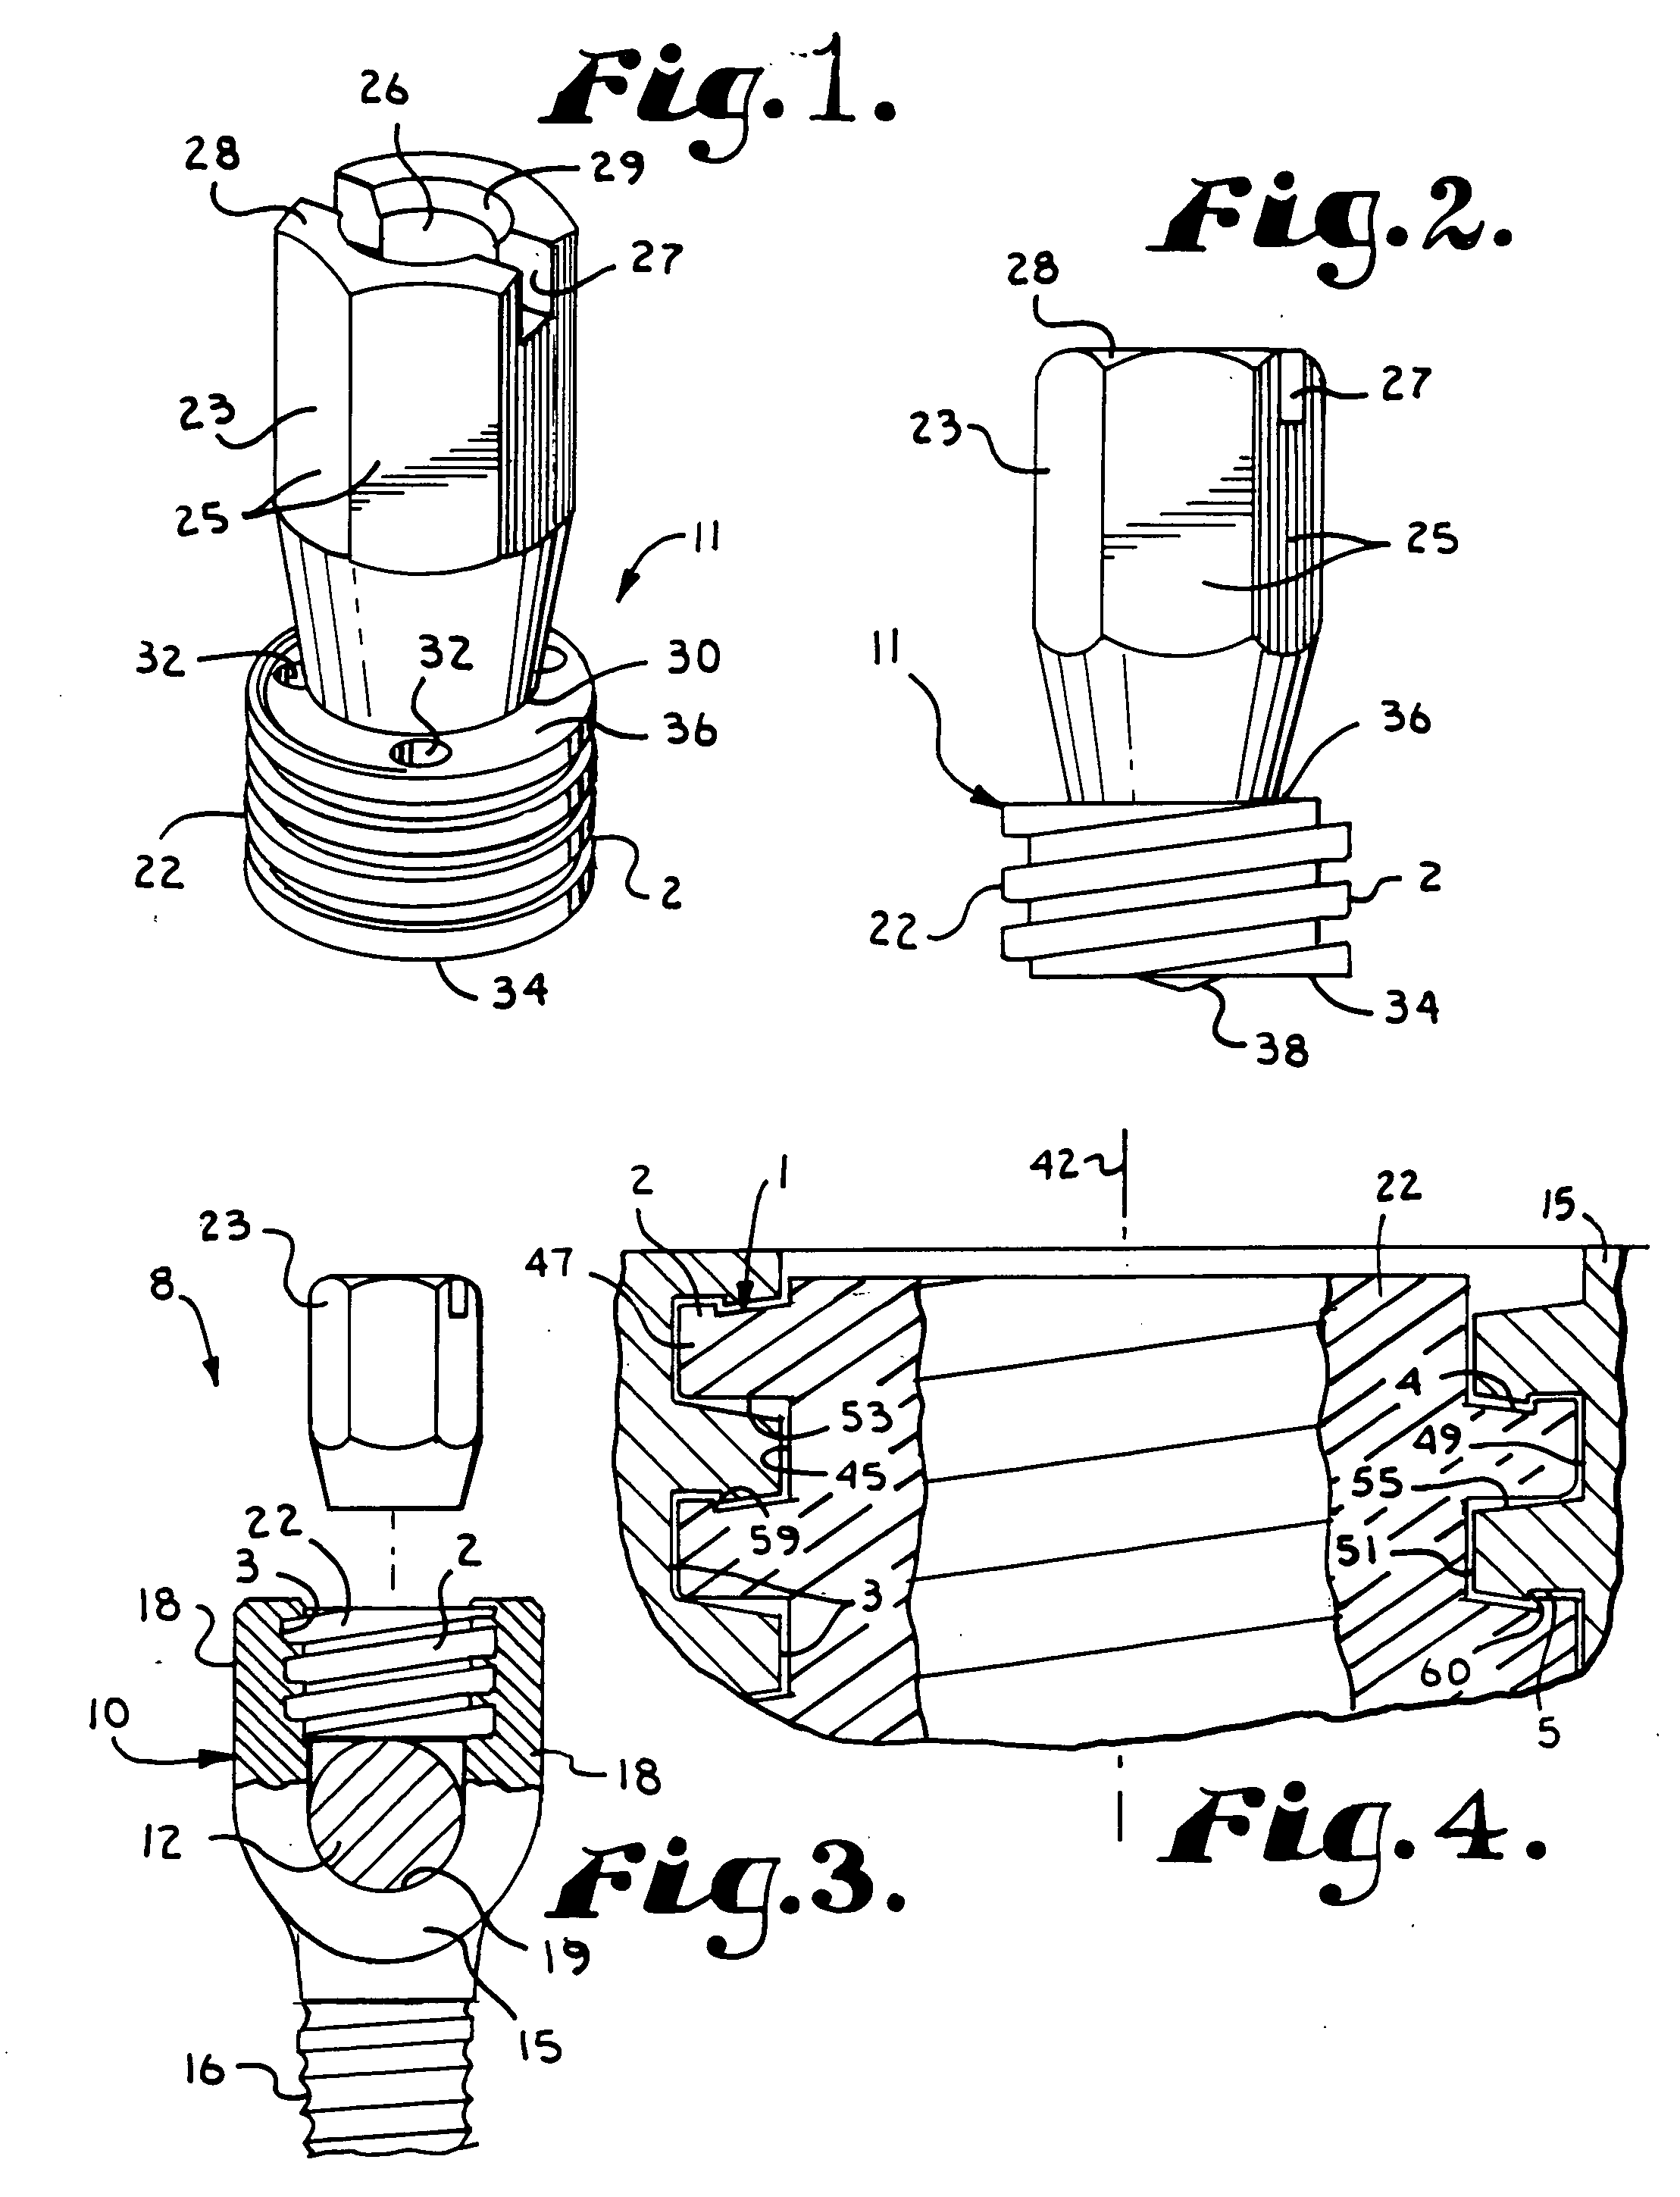 Helical interlocking mating guide and advancement structure